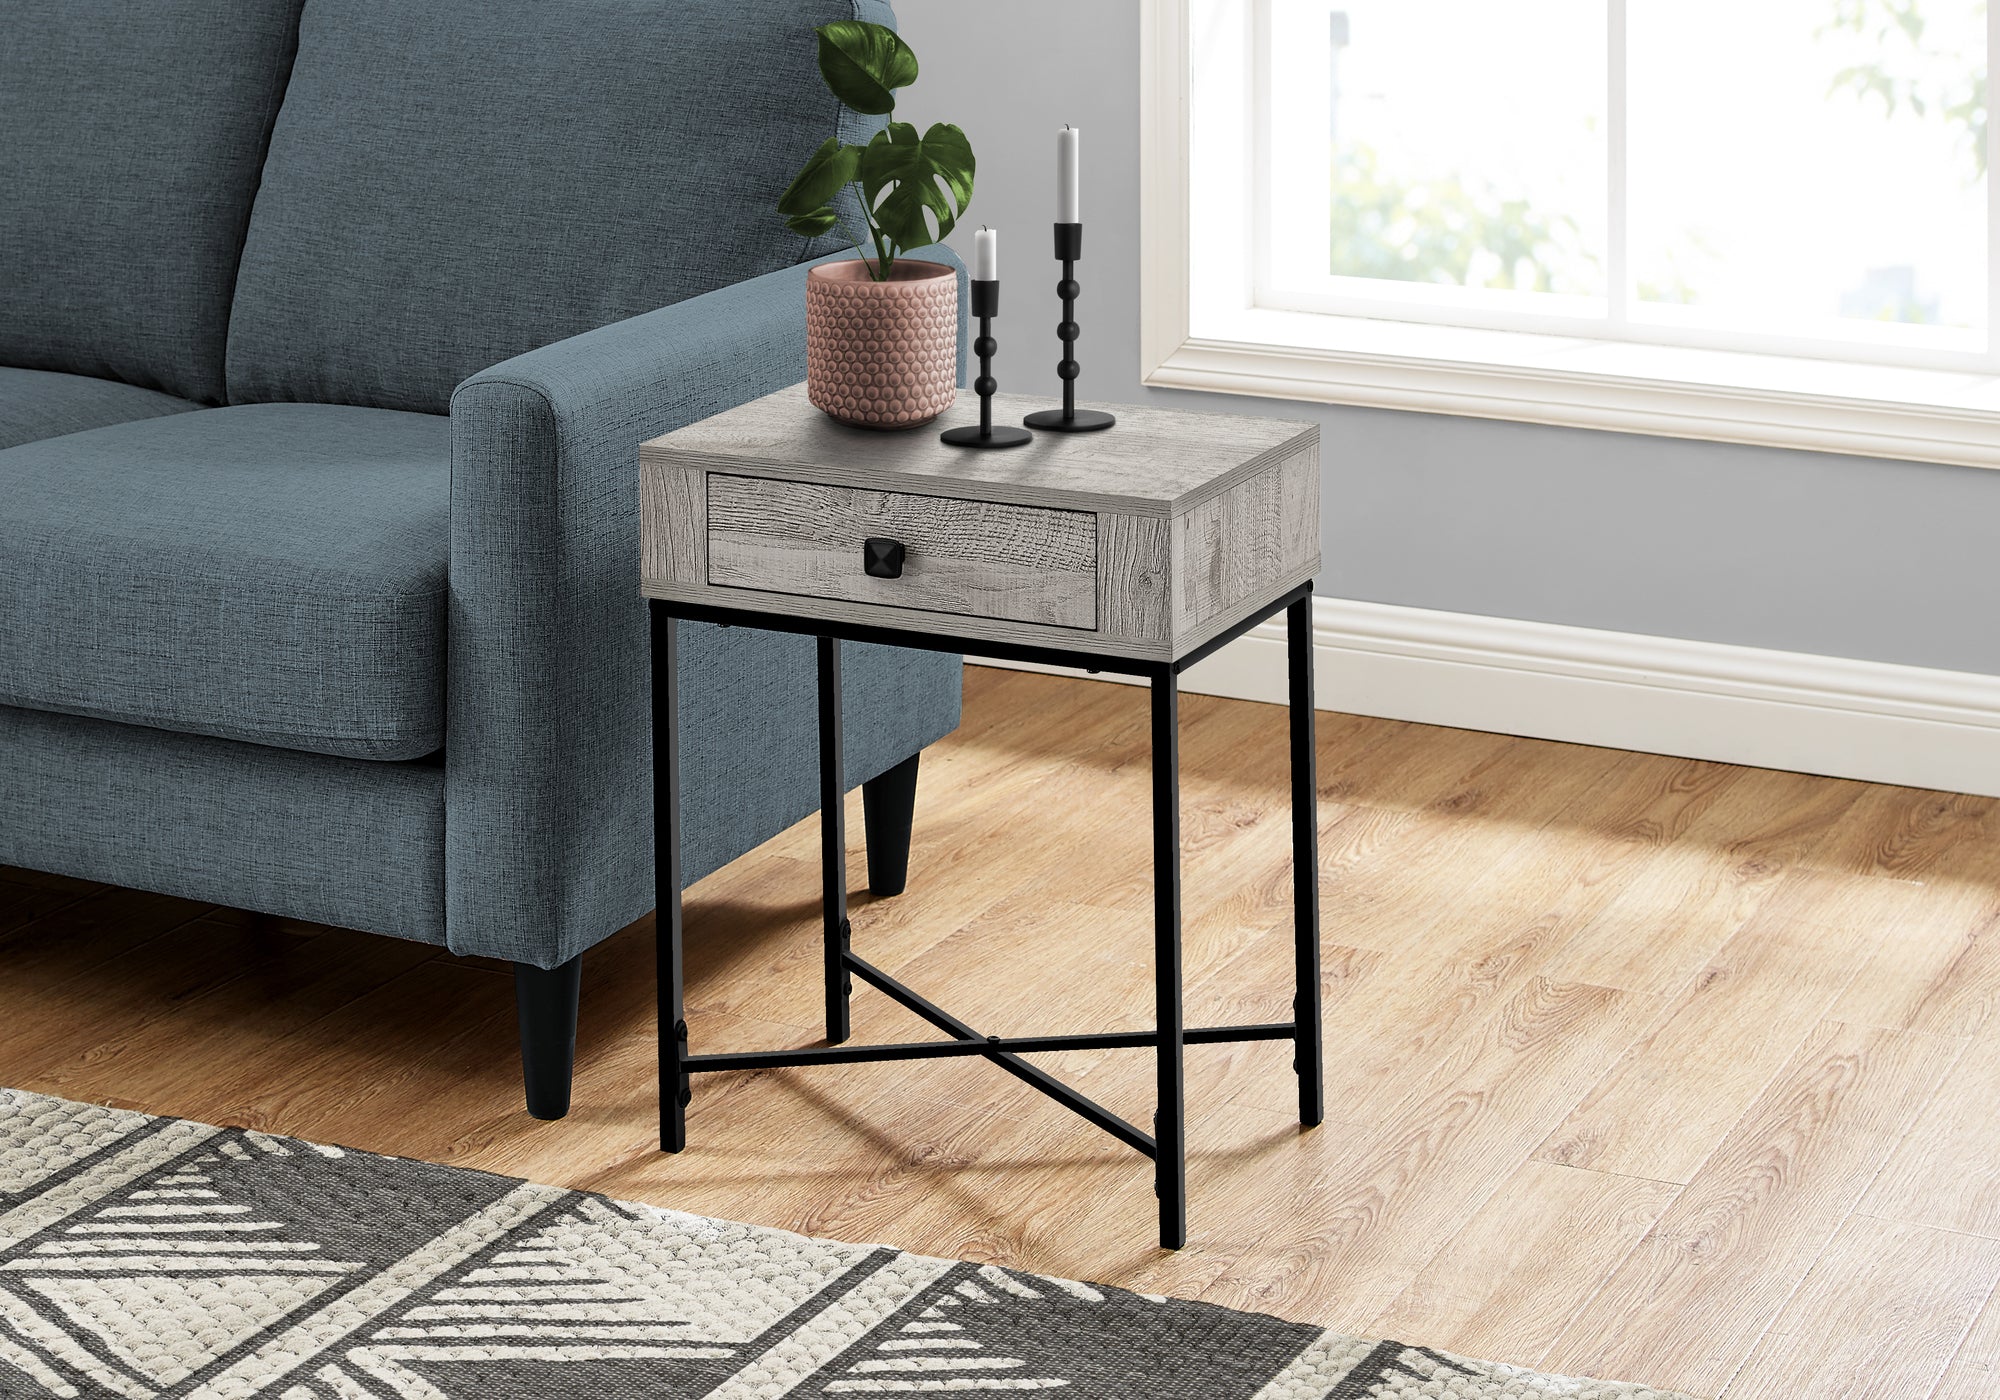 I 3543 - ACCENT TABLE - 22"H / GREY / BLACK METAL BY MONARCH SPECIALTIES INC